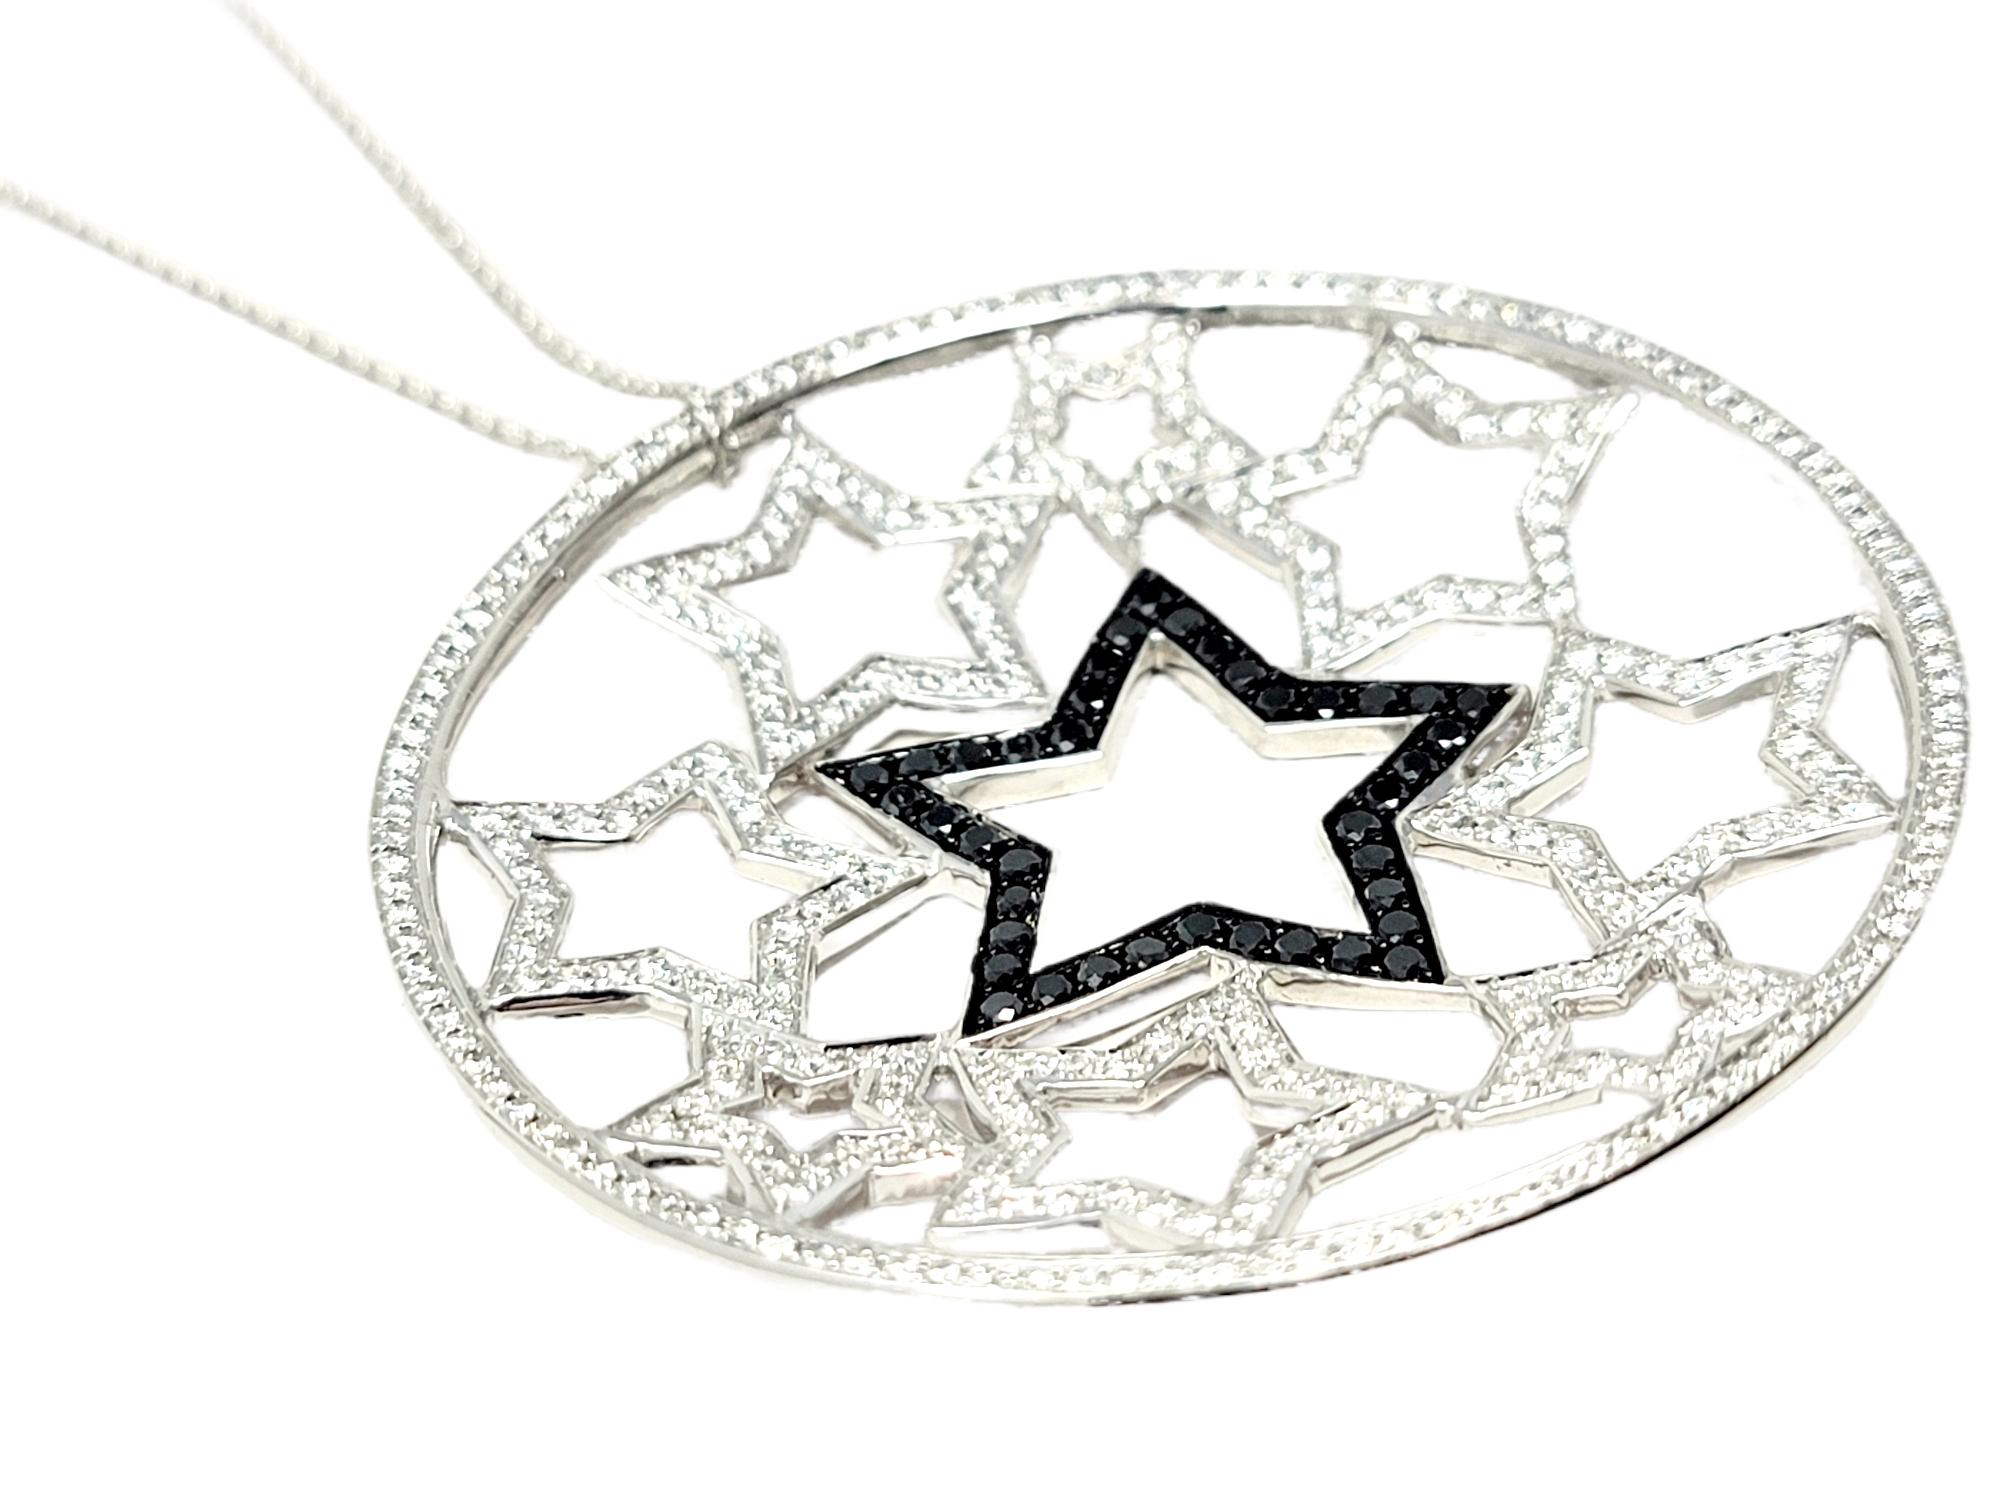 This stunning large medallion pendant with a unique star design will become an instant signature piece. It features a circular pendant approximately 1 7/8